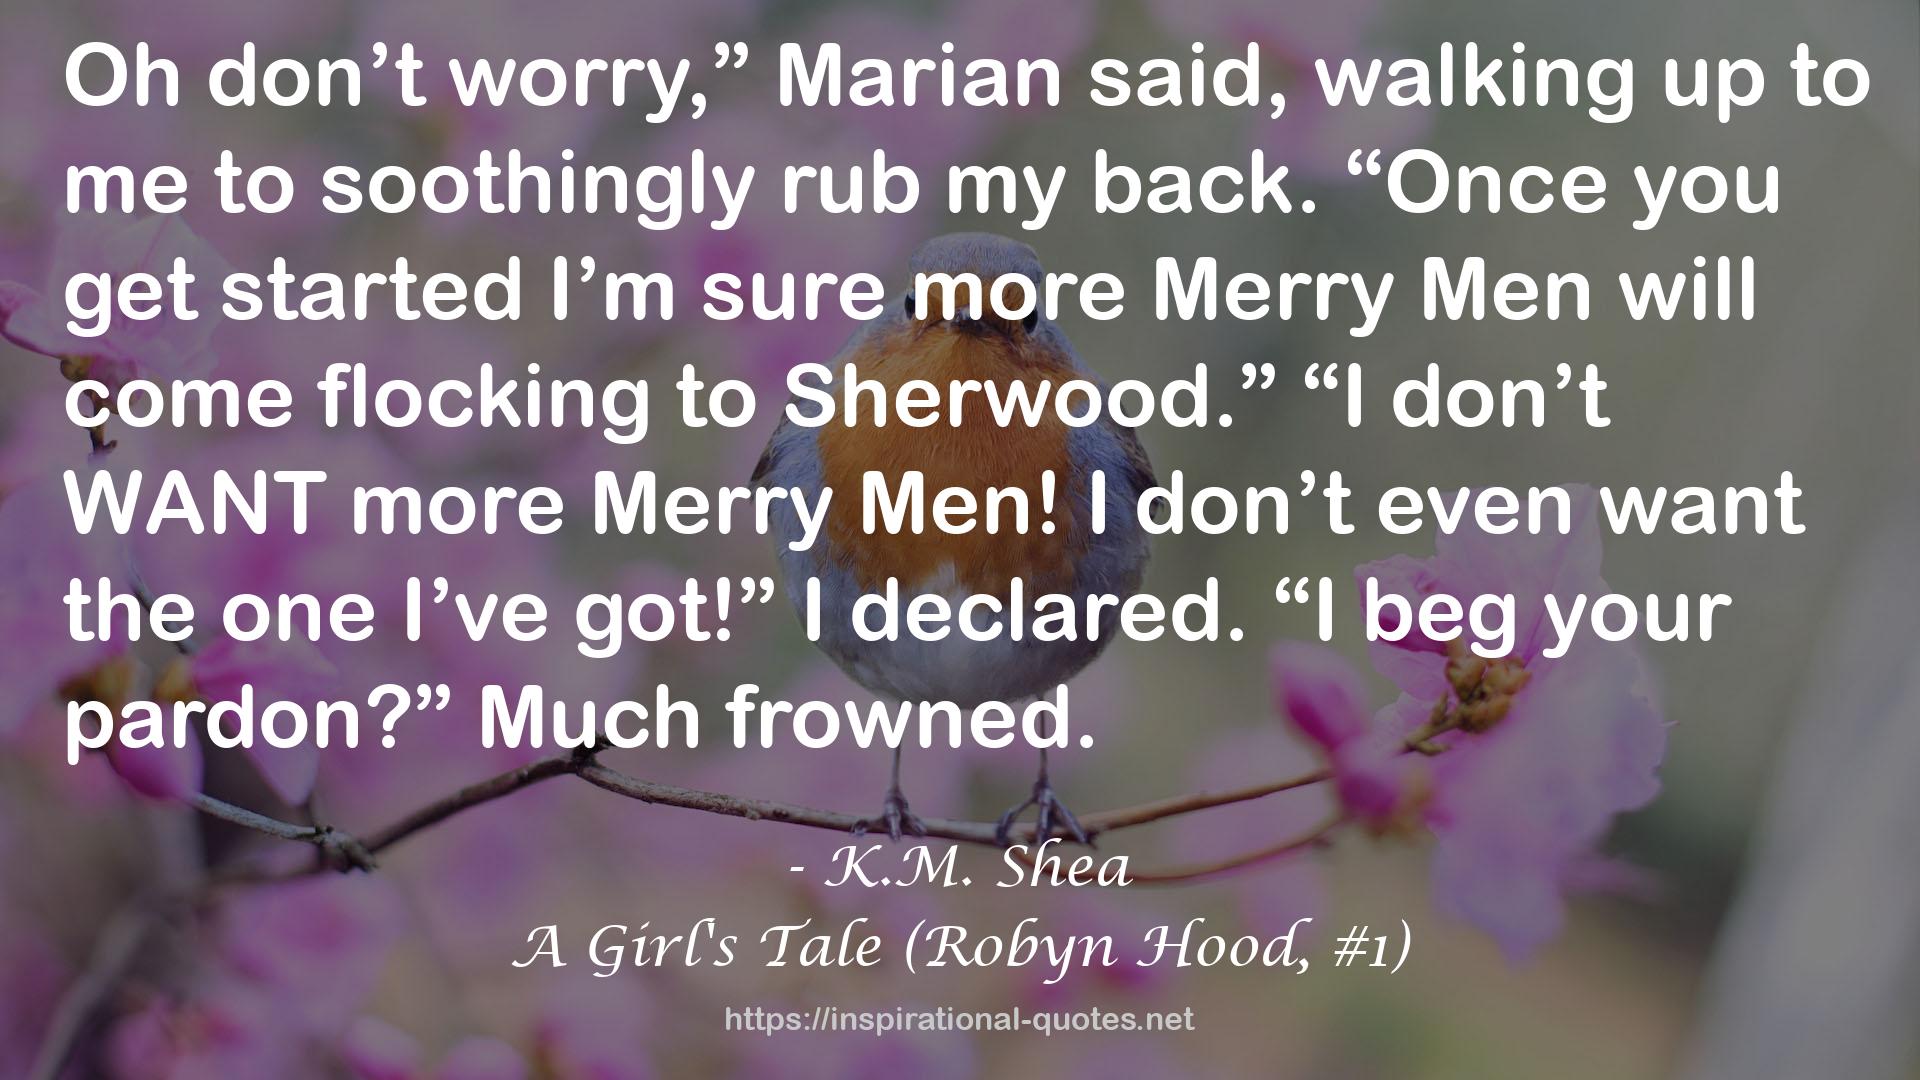 A Girl's Tale (Robyn Hood, #1) QUOTES